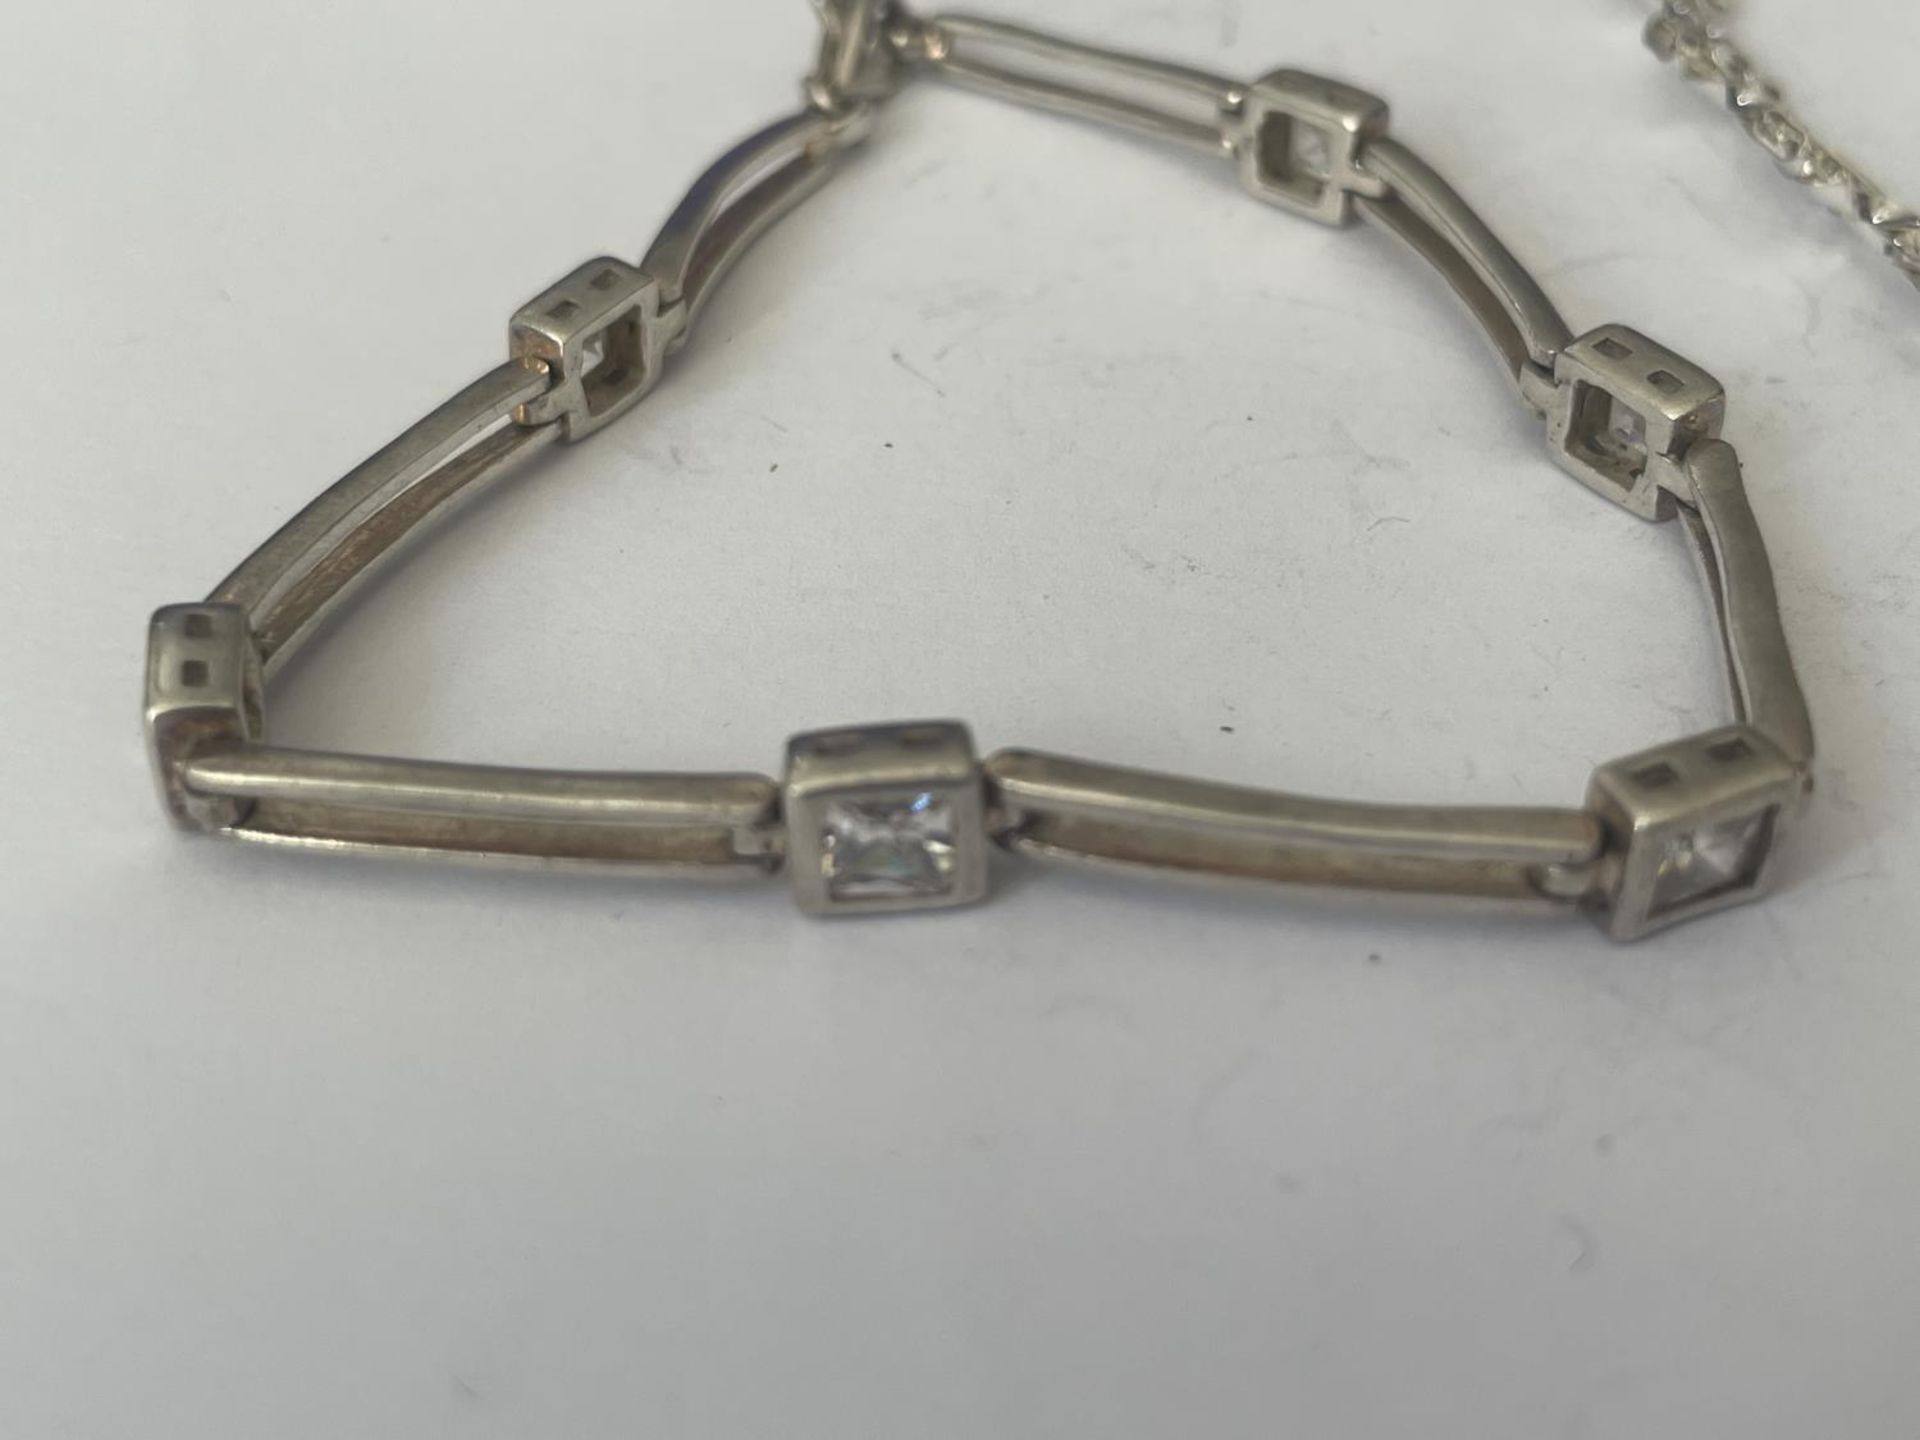 TWO SILVER BRACELETS - Image 2 of 3